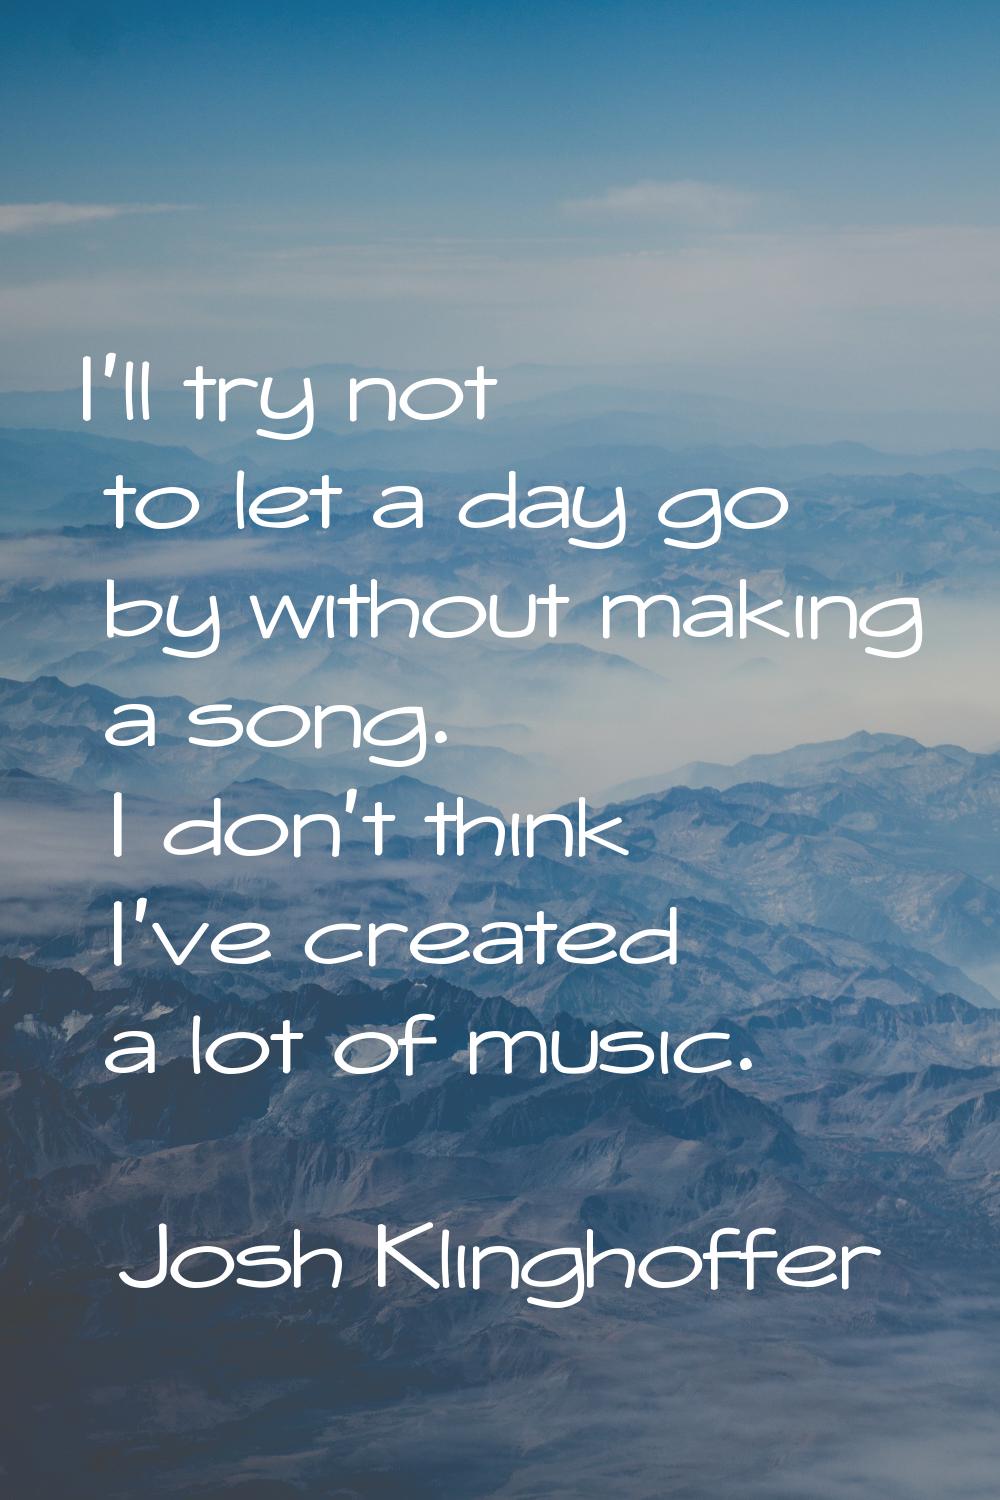 I'll try not to let a day go by without making a song. I don't think I've created a lot of music.